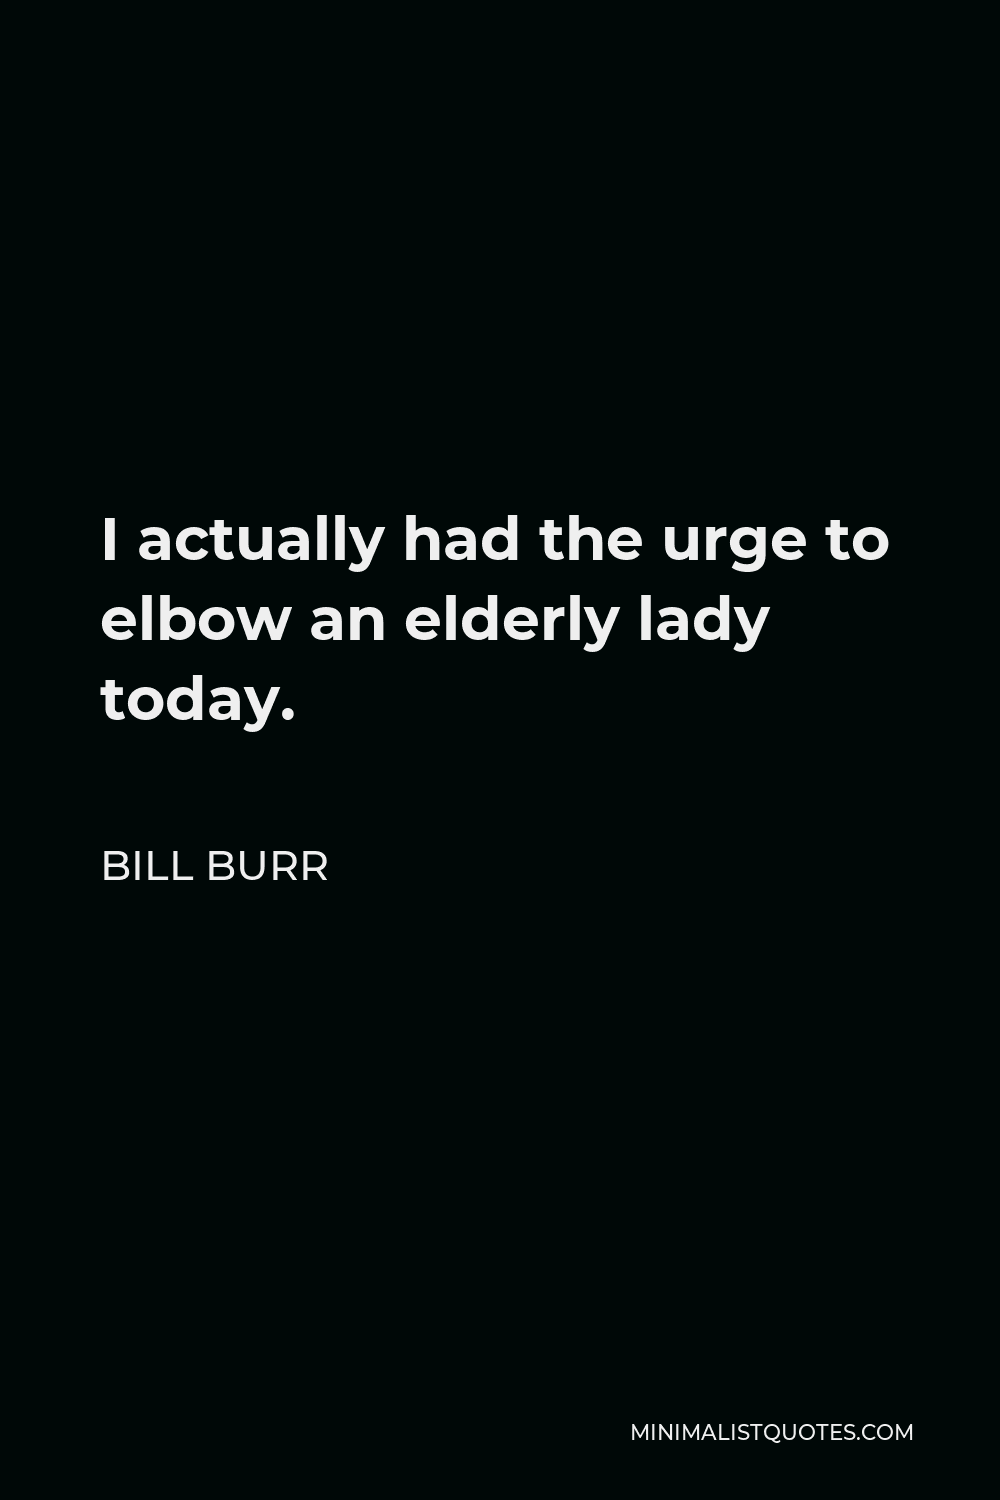 Bill Burr Quote - I actually had the urge to elbow an elderly lady today.